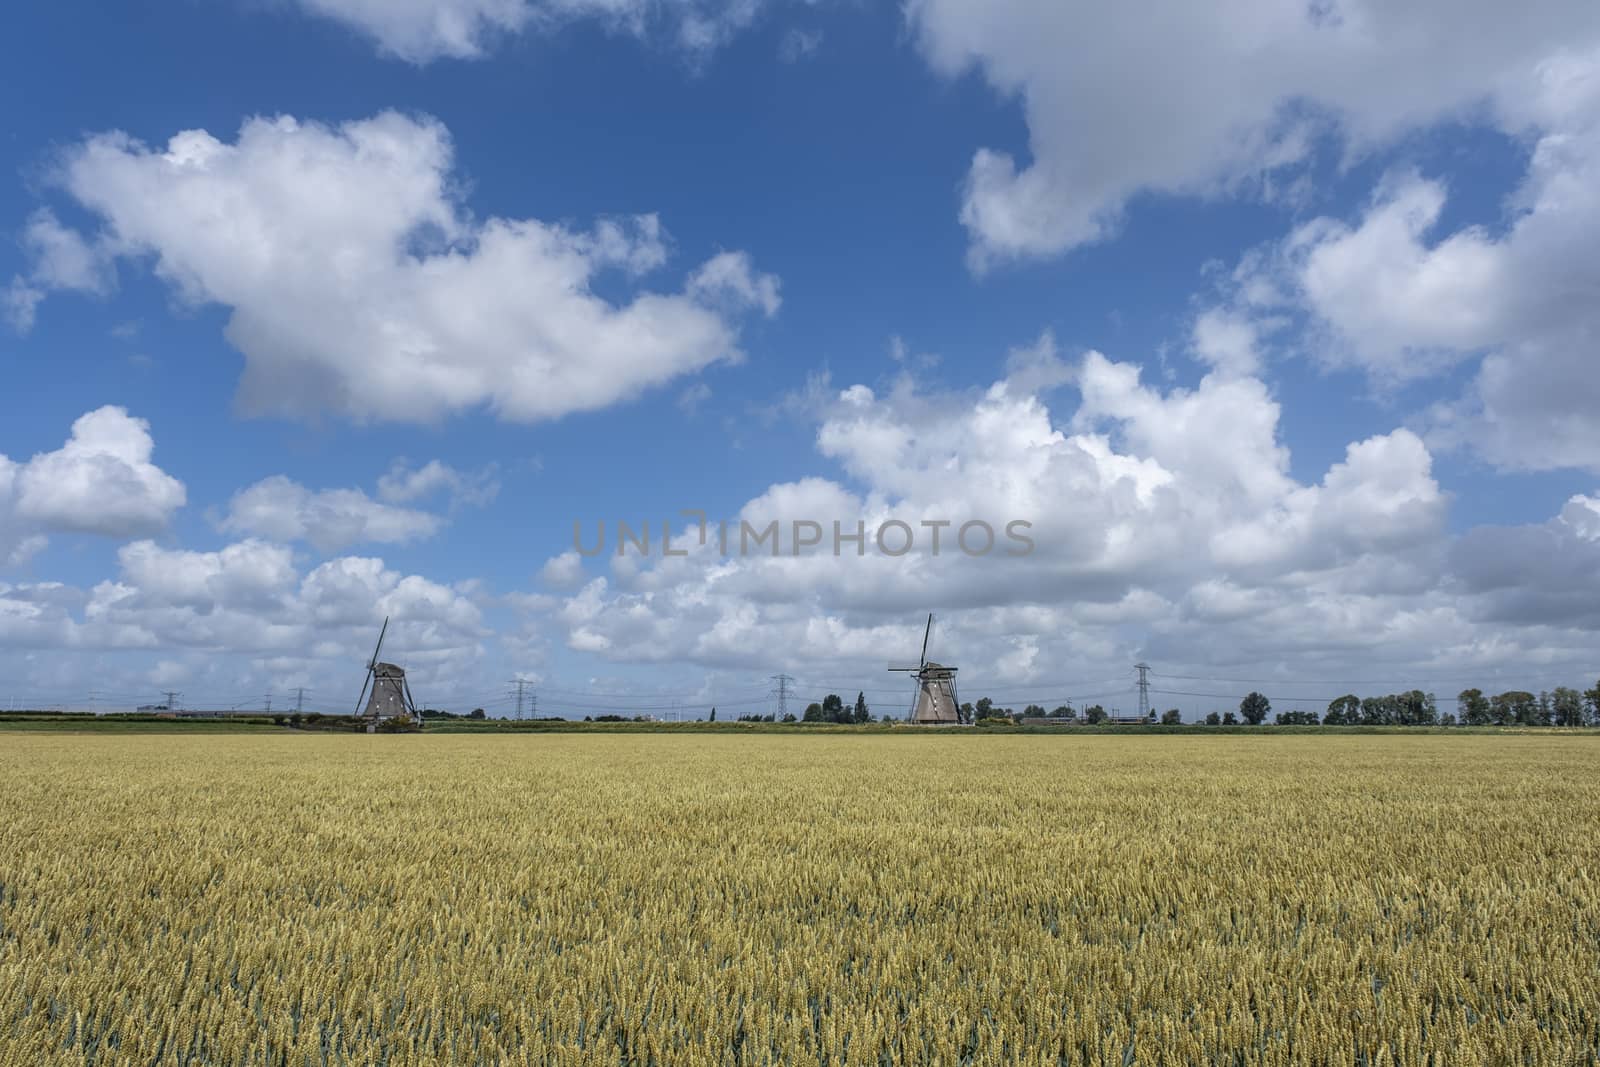 Wheat field ready for harvest under a blue summer sky in the Netherlands